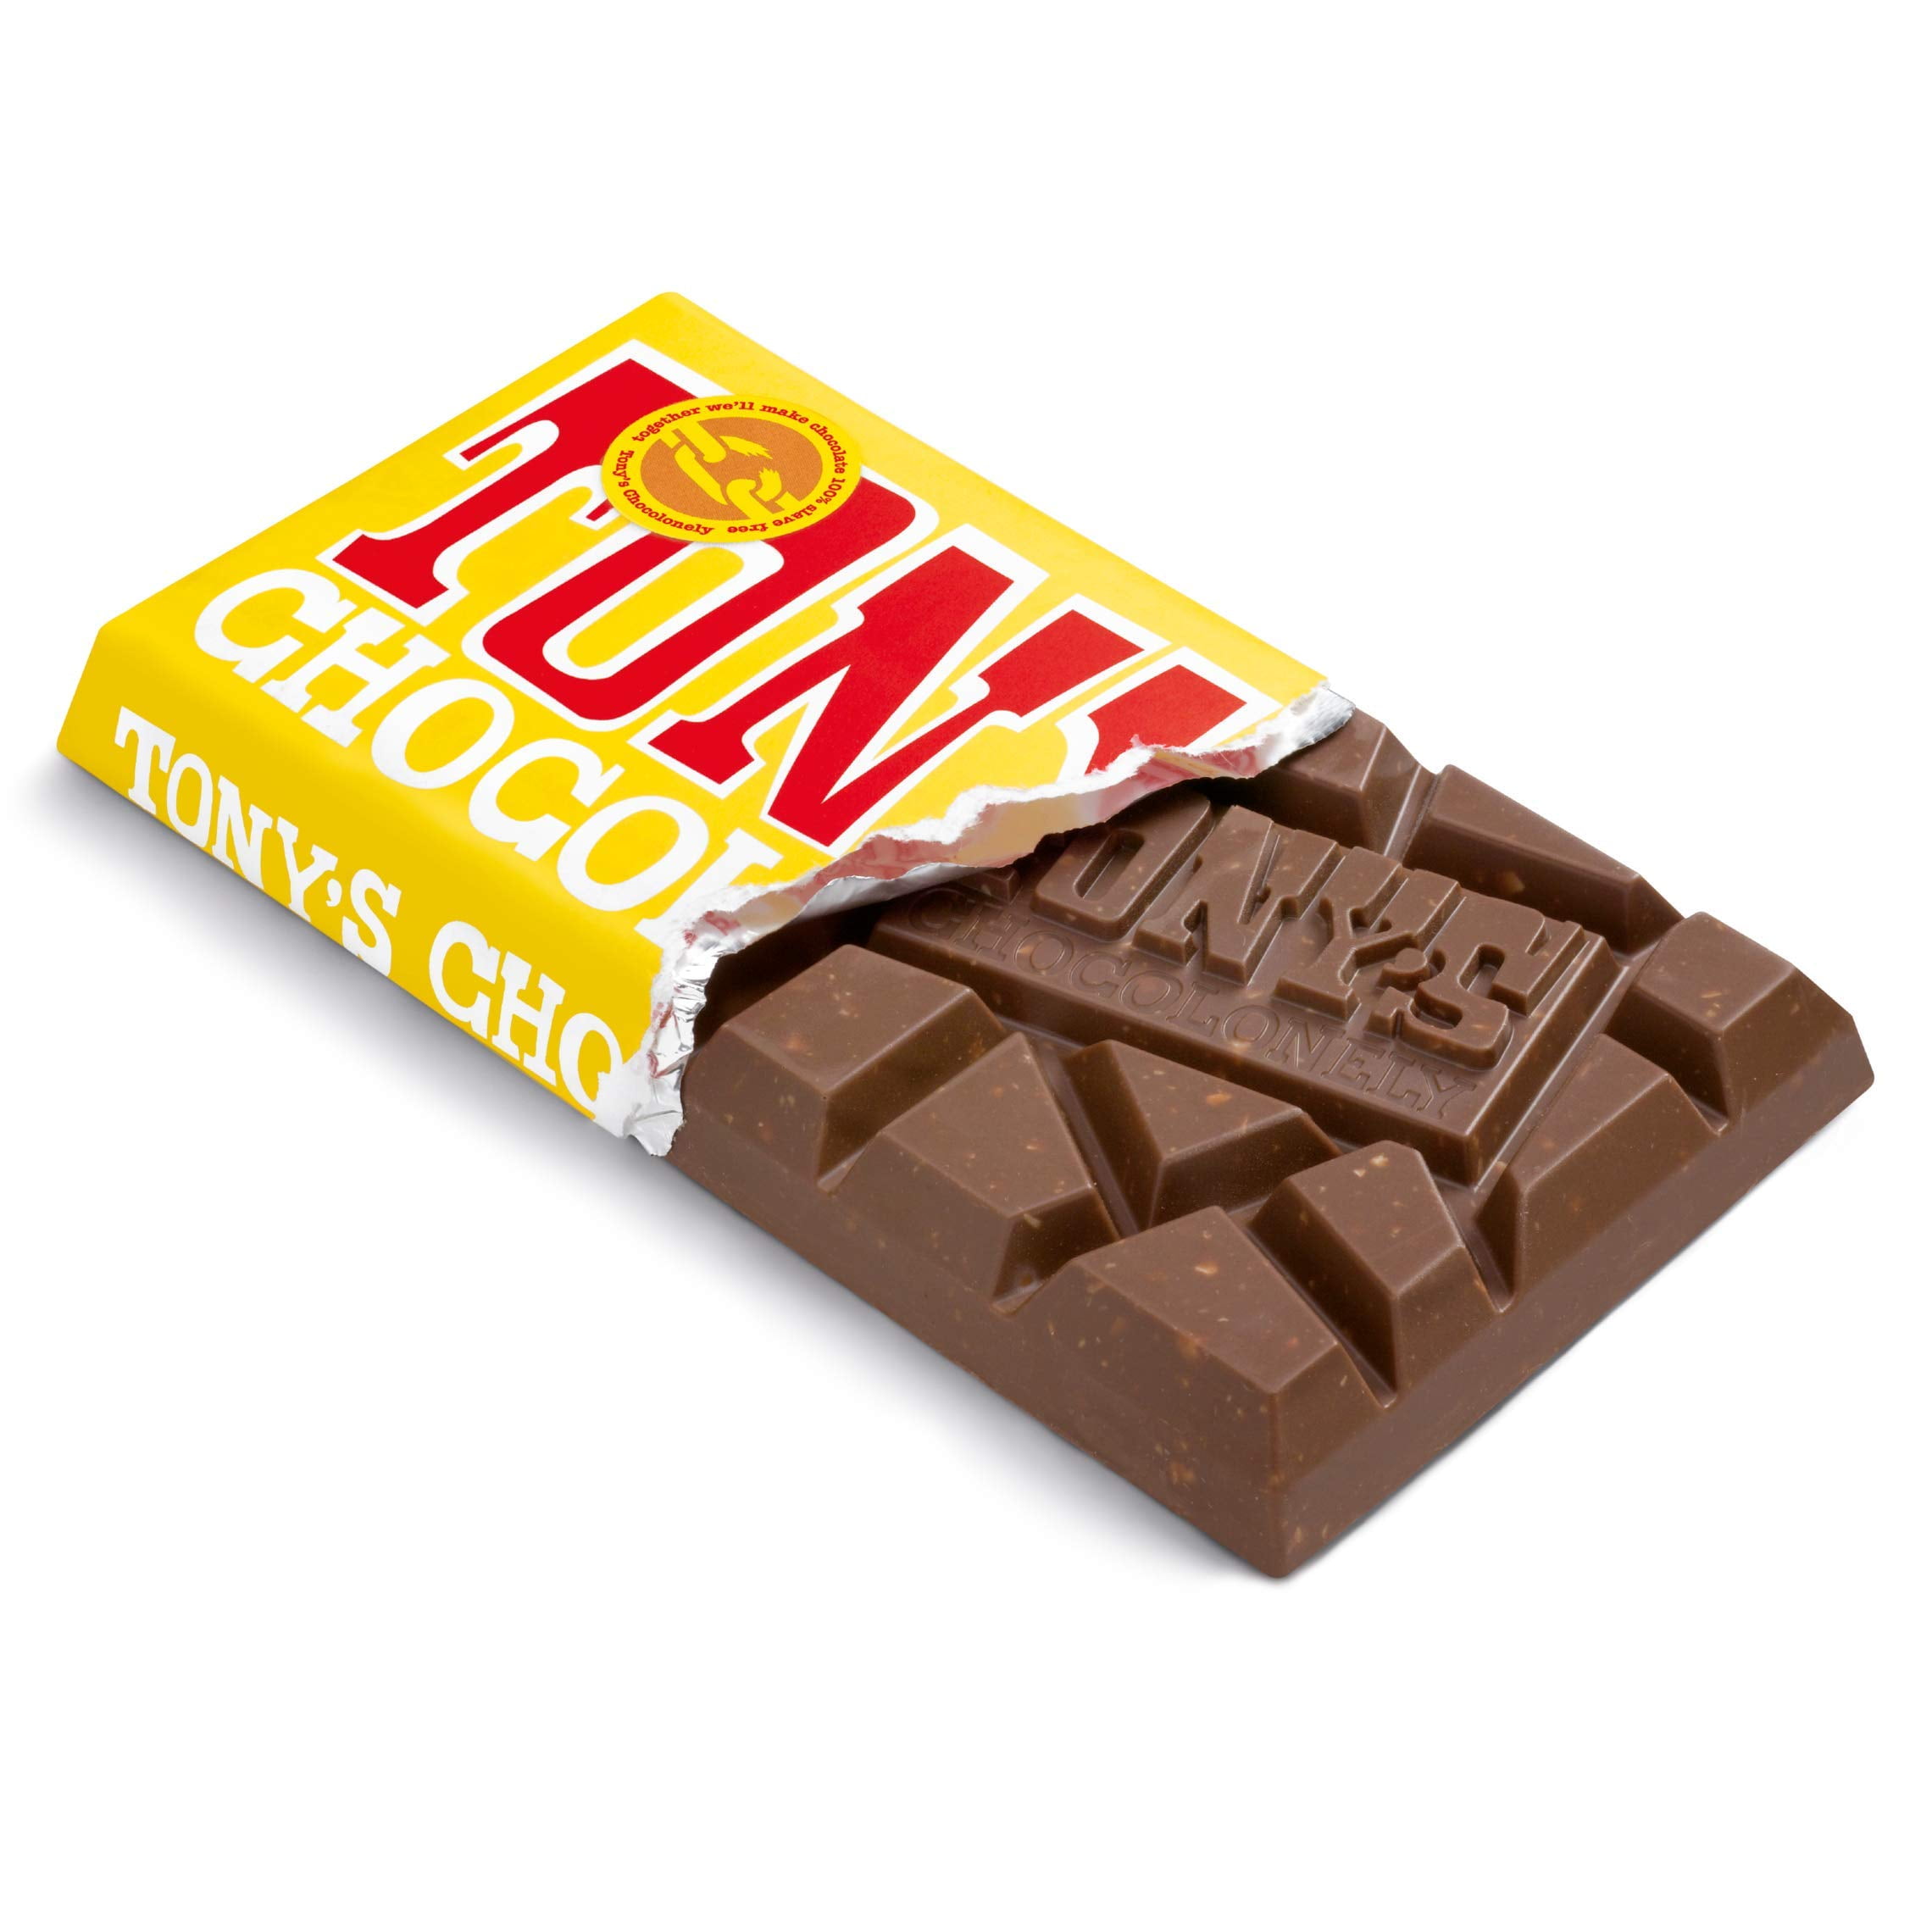 Tony's Chocolonely 32% Milk Chocolate Bar with Honey Almond Nougat, 6.35  Ounce, 15 Pack 